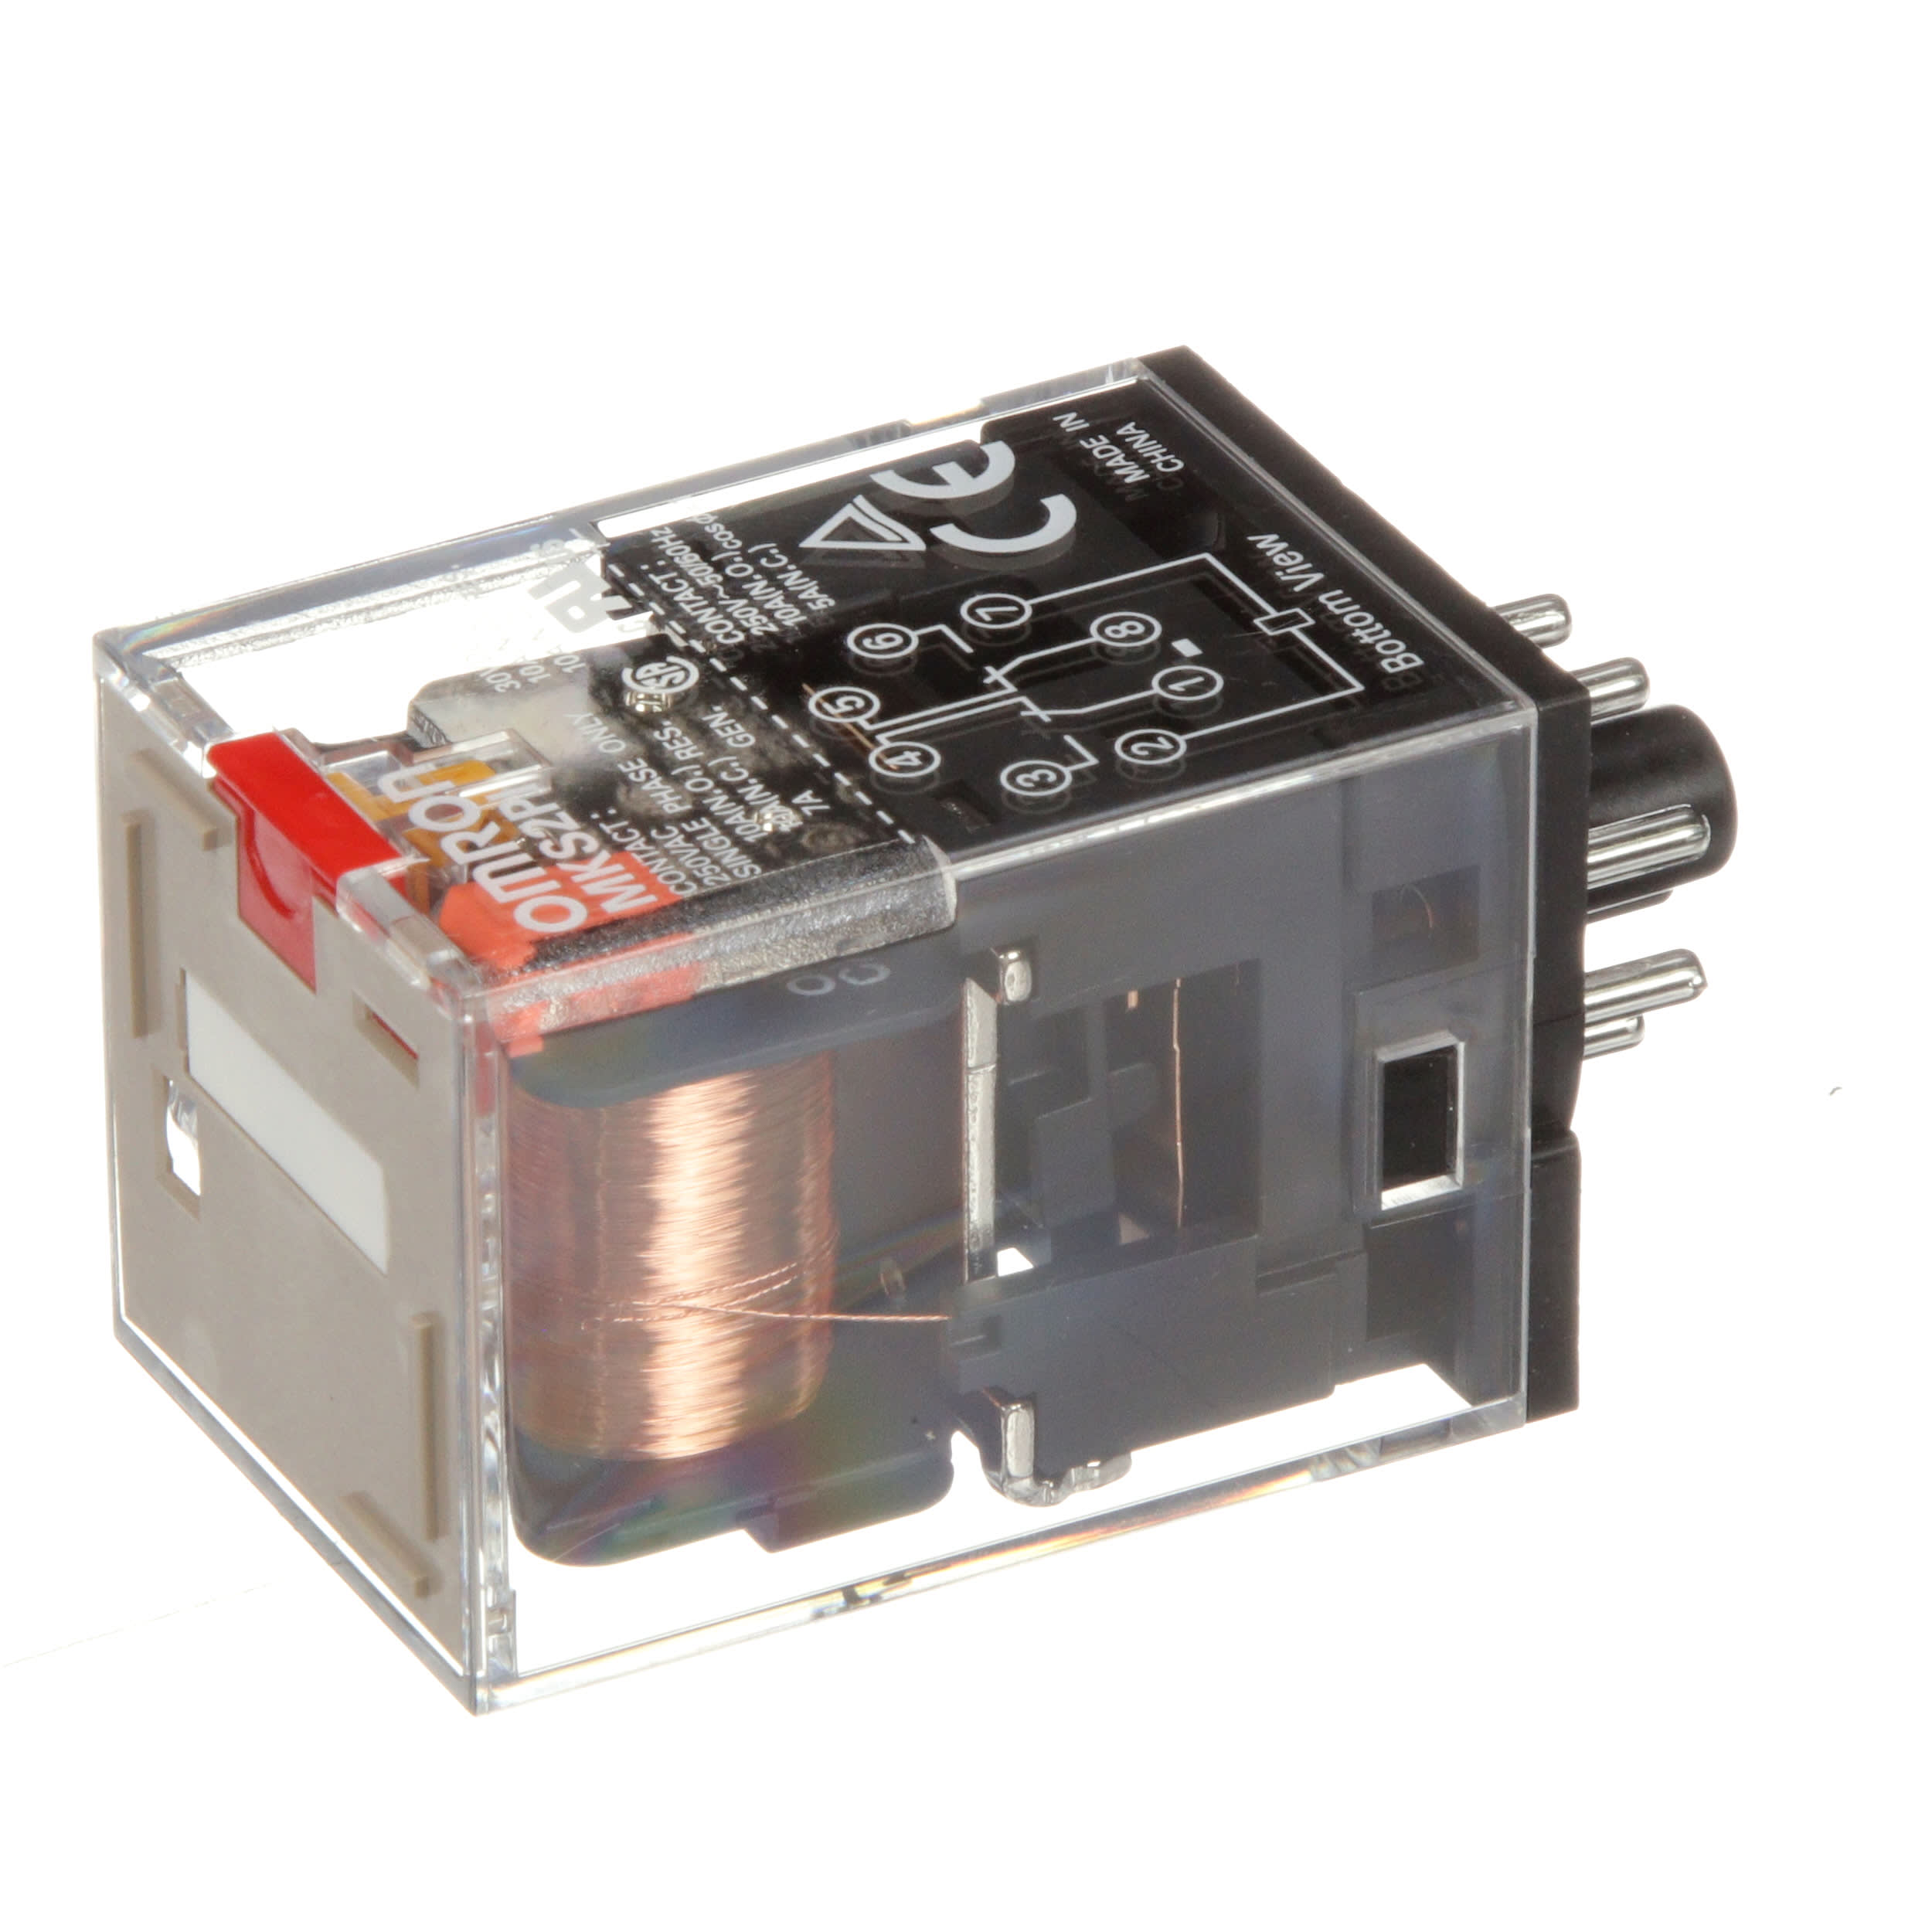 Plug-In Terminal 12 VDC Rated Load Voltage Omron MKS2PI DC12 General Purpose Relay with Mechandical Indicator and Lockable Test Button Basic Model Type Standard Internal Connections 112 mA Rated Load Current Double Pole Double Throw Contacts 